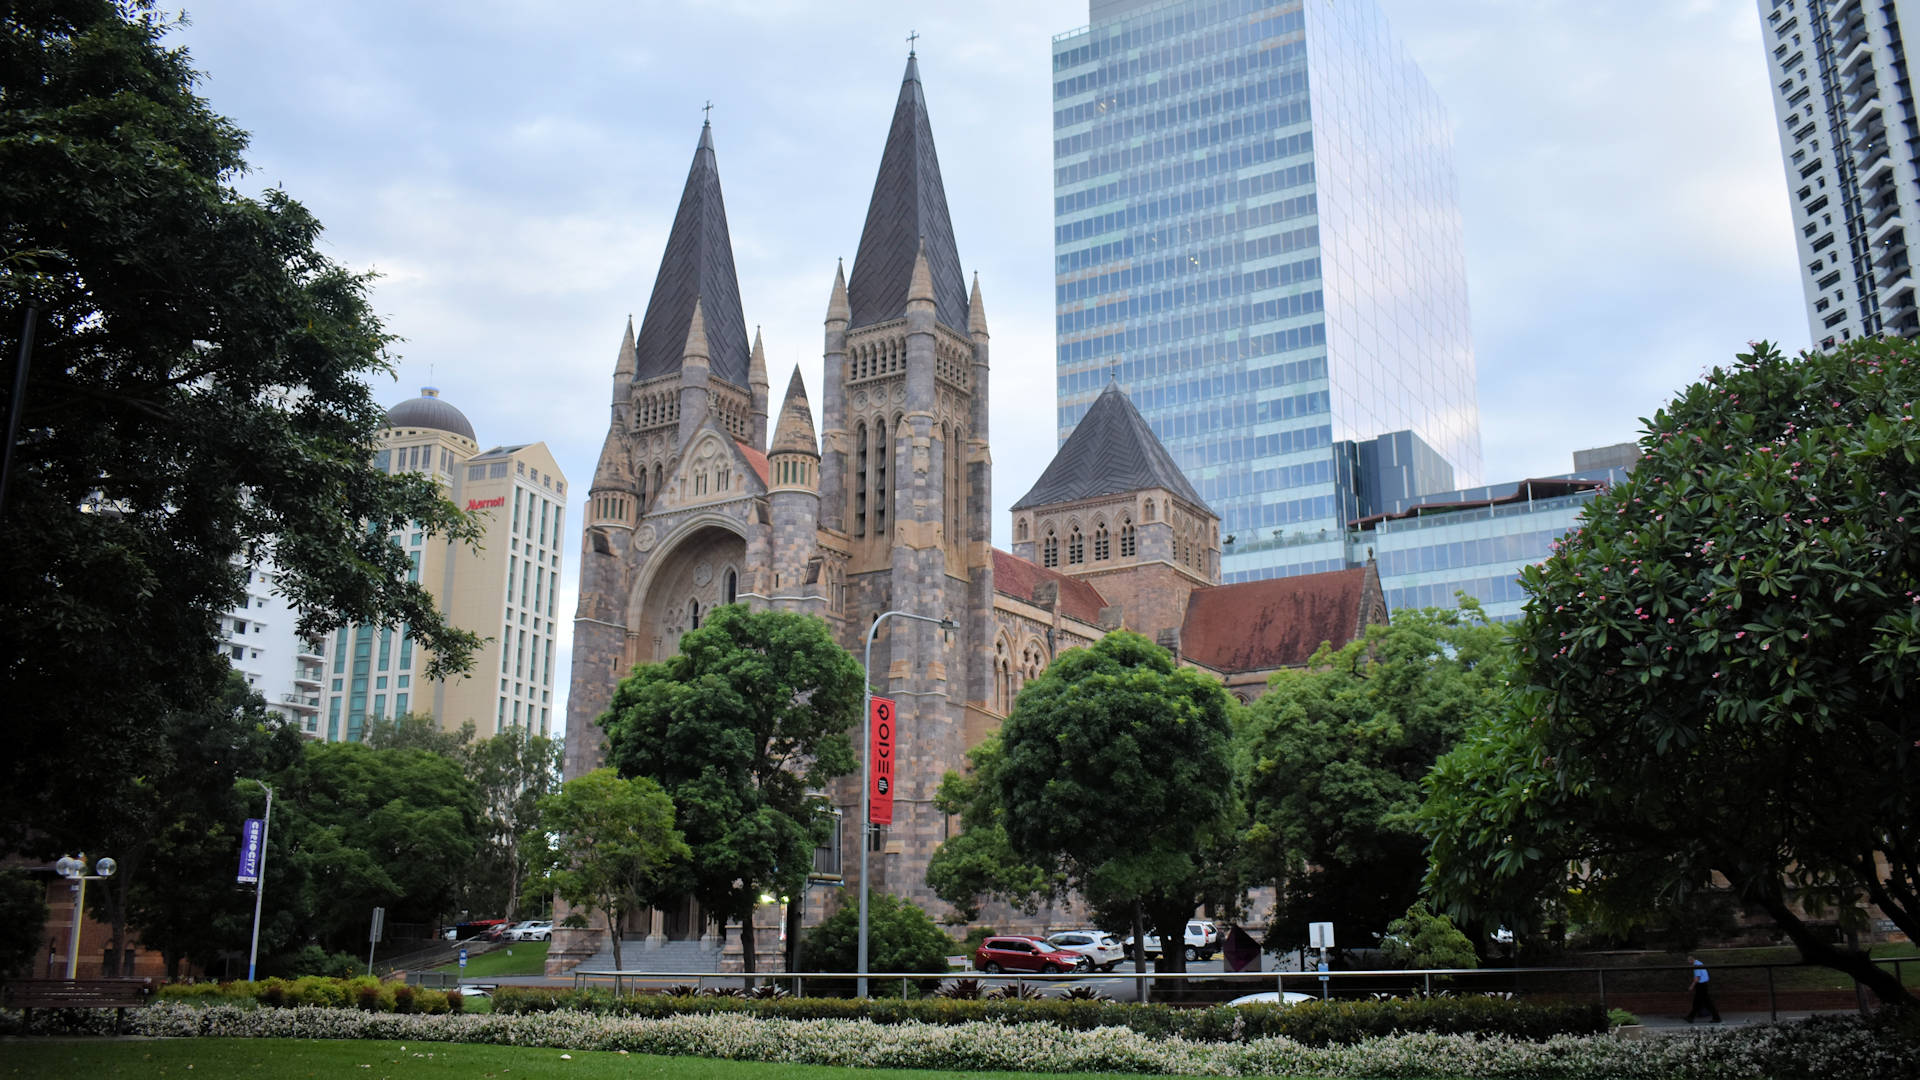 St Johns Cathedral